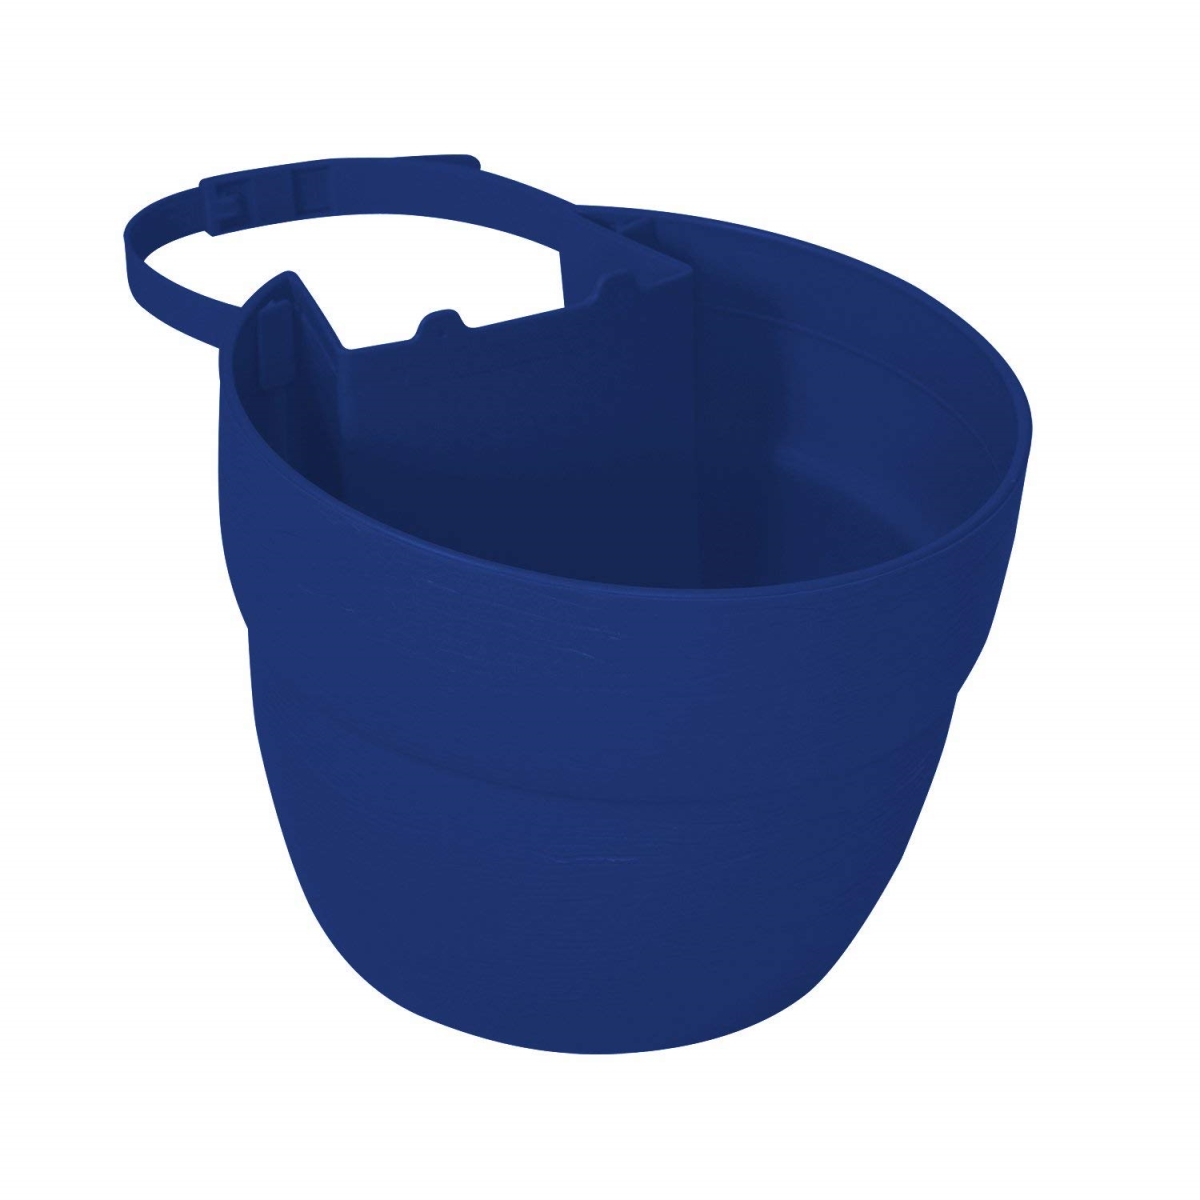 2468-1 Post Planter Both Permanent And Temporary Installation Options Garden In Untraditional Spaces - Cobalt Blue